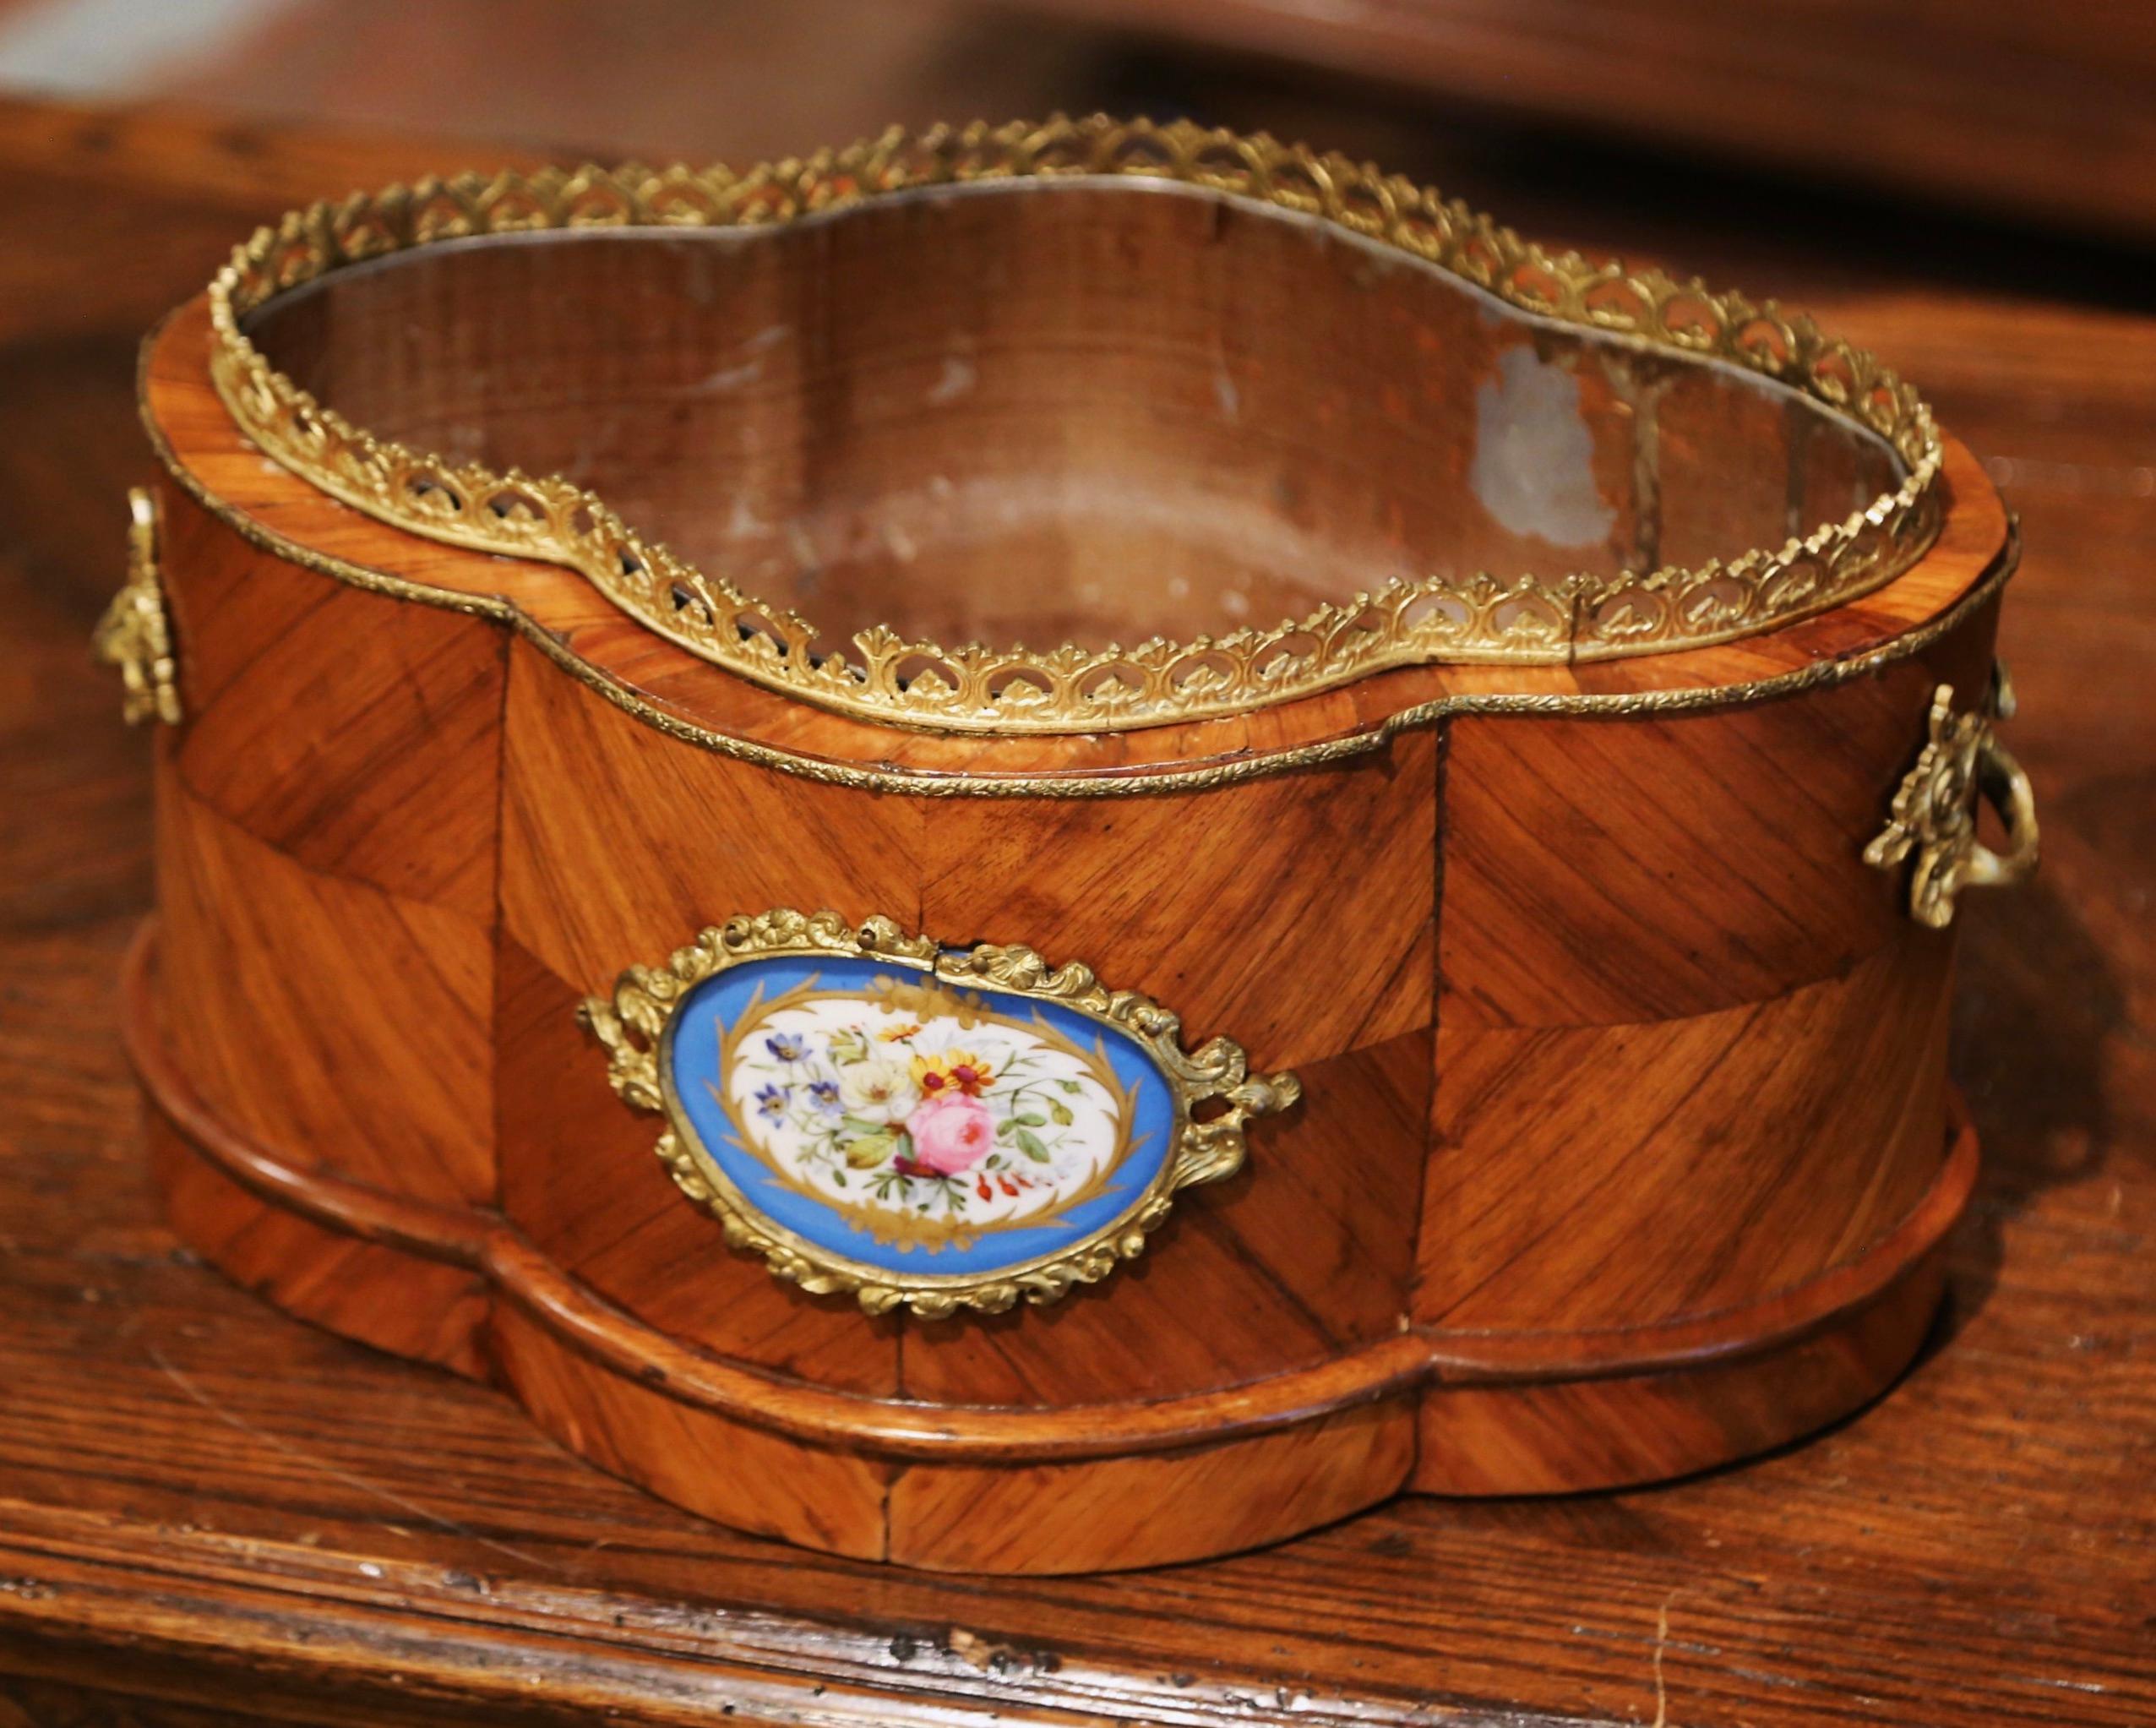 Decorate a dining table or a buffet top with this elegant, antique oval planter. Crafted in France circa 1870, and decorated with marquetry and parquetry motifs, the jardiniere with side handles, features a brass pierced gallery around the rim, and